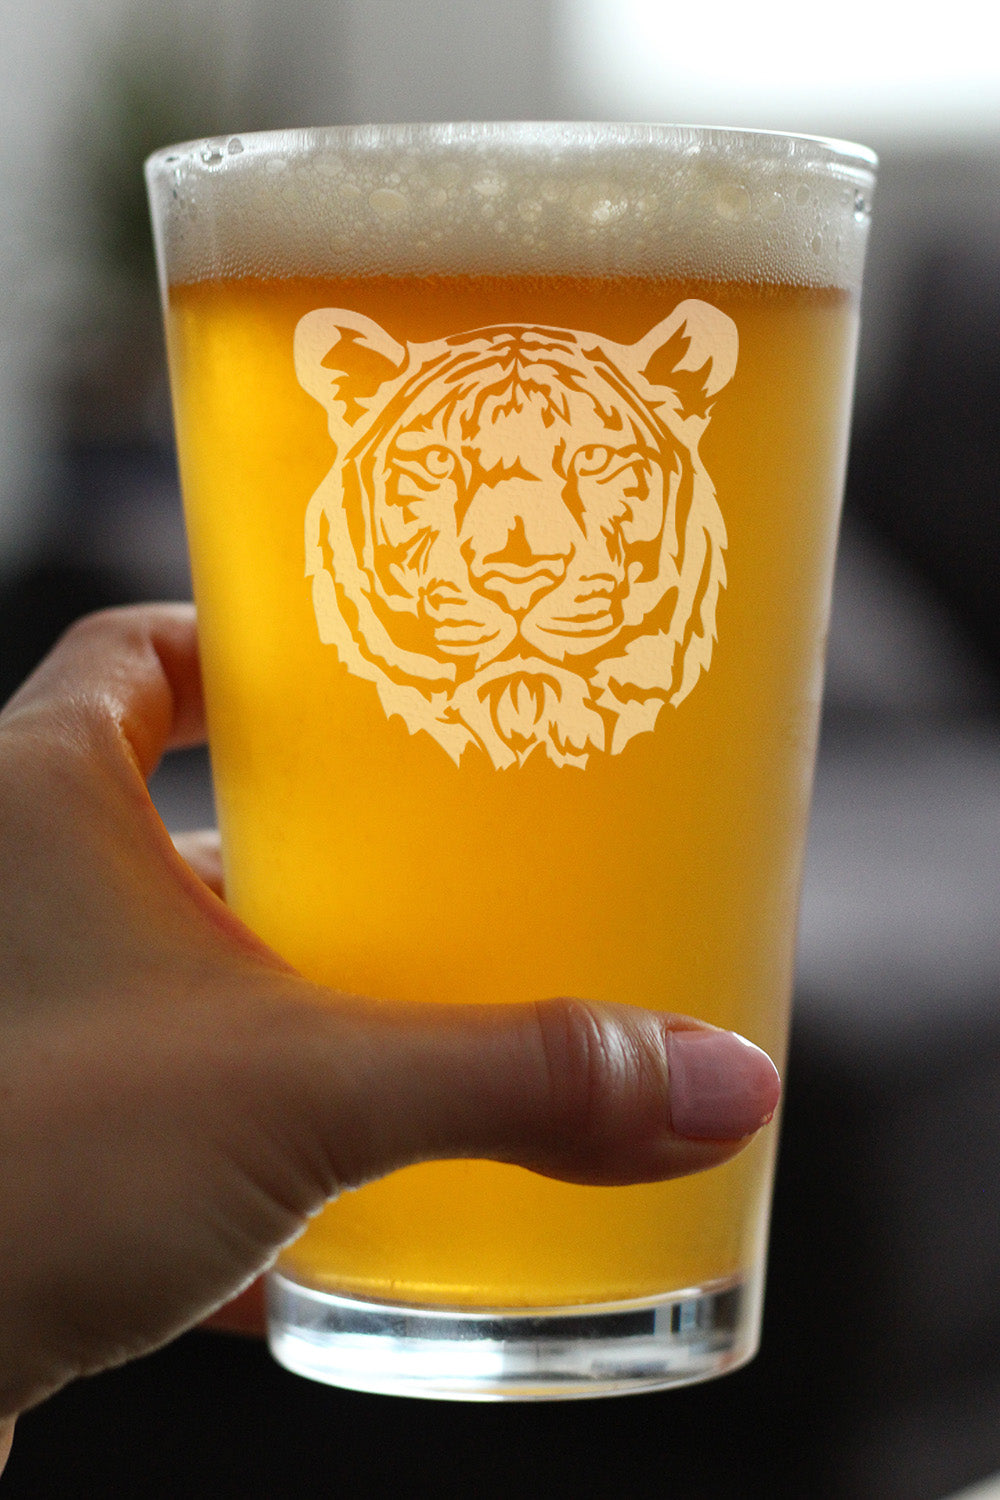 Tiger Face Pint Glass for Beer - Unique Tiger Themed Decor and Gifts for Animal Lovers - 16 Oz Glasses